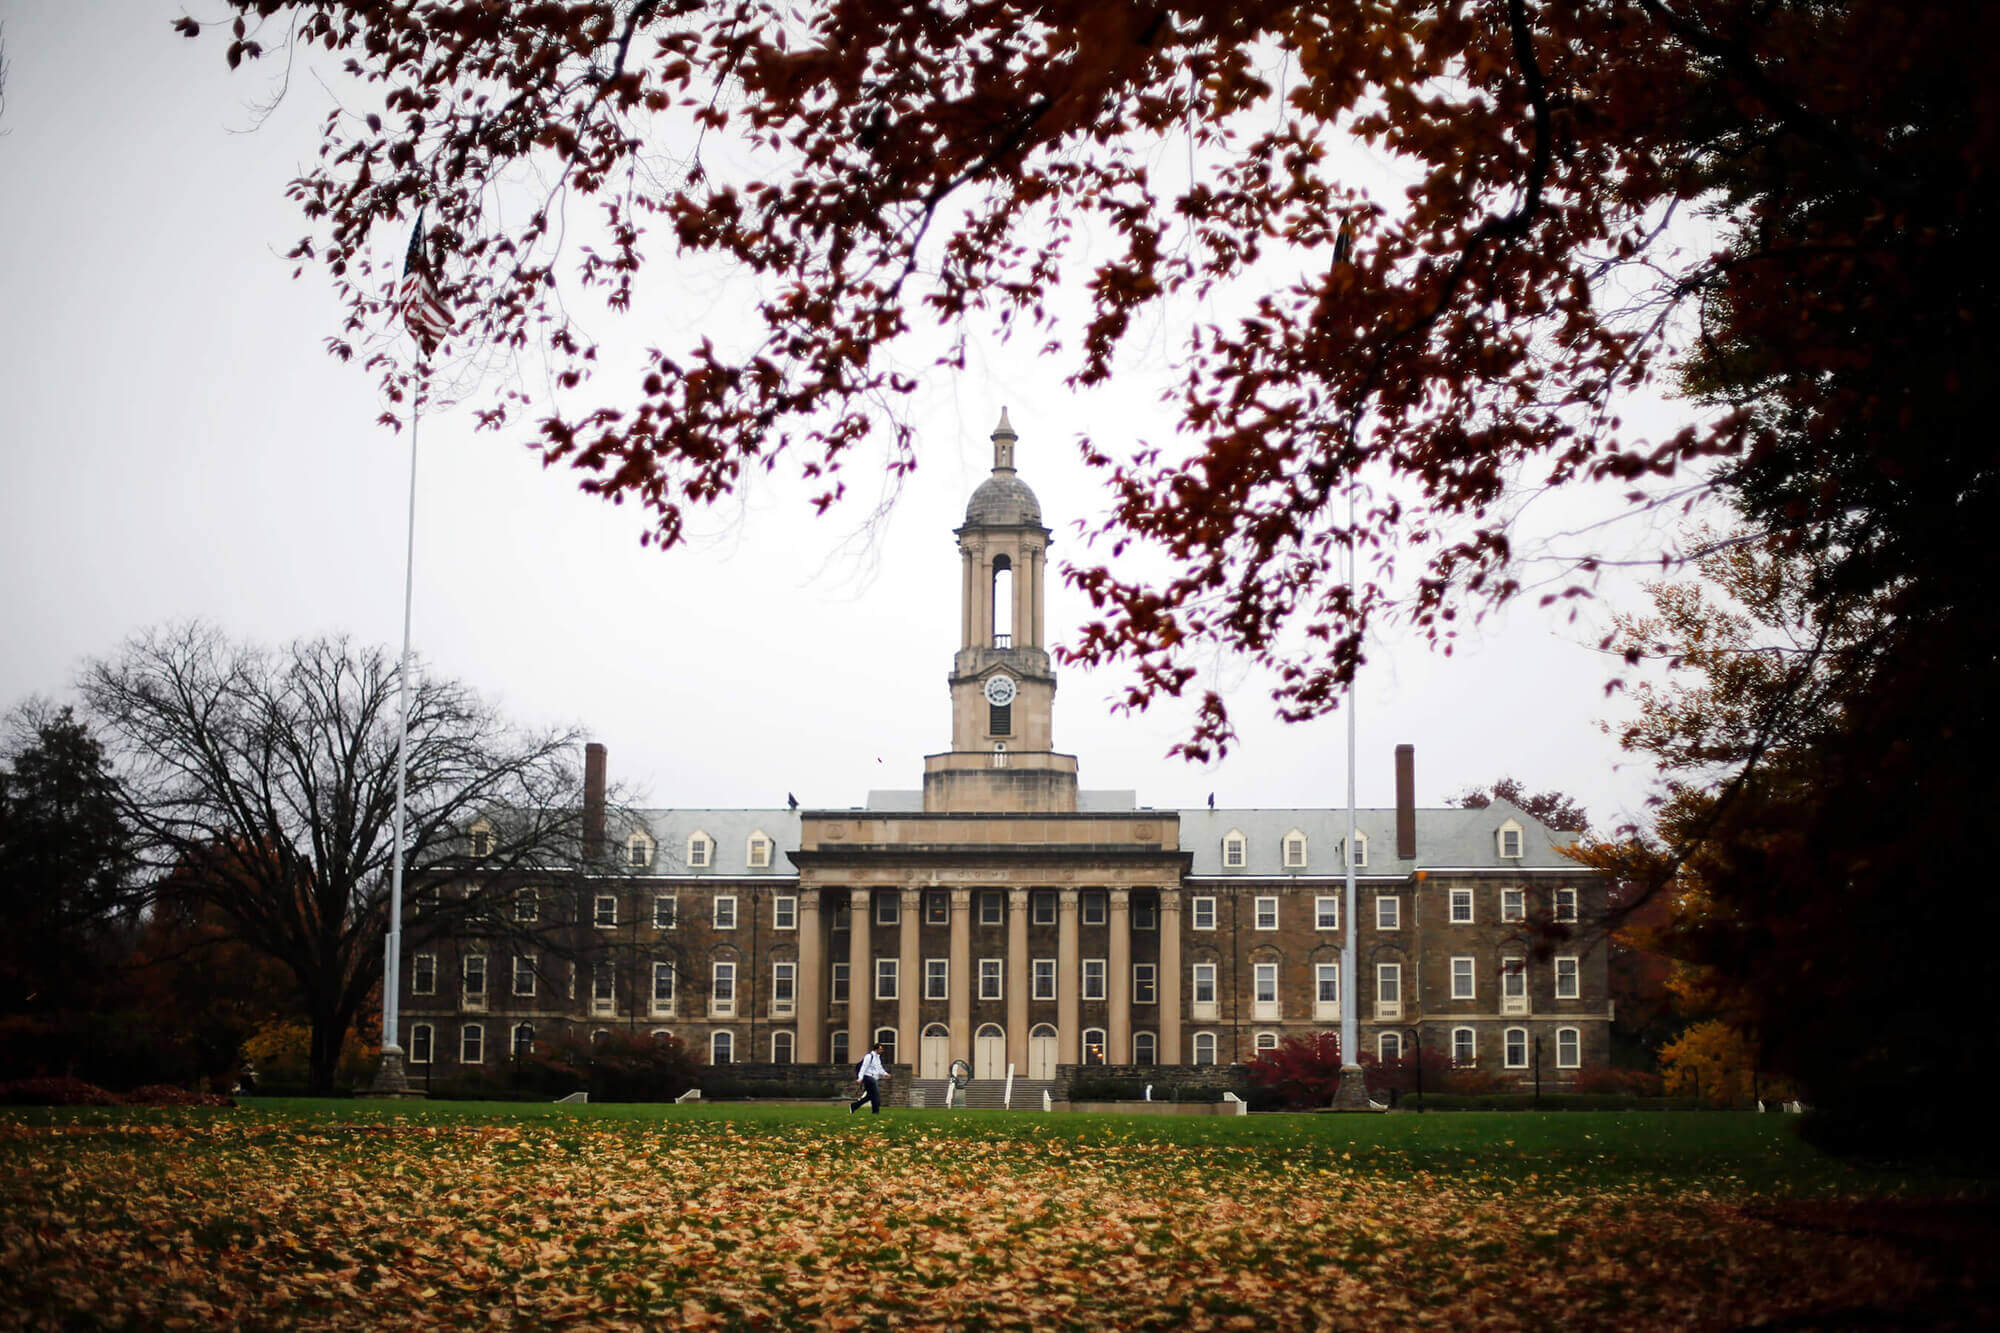 Image of Penn State campus